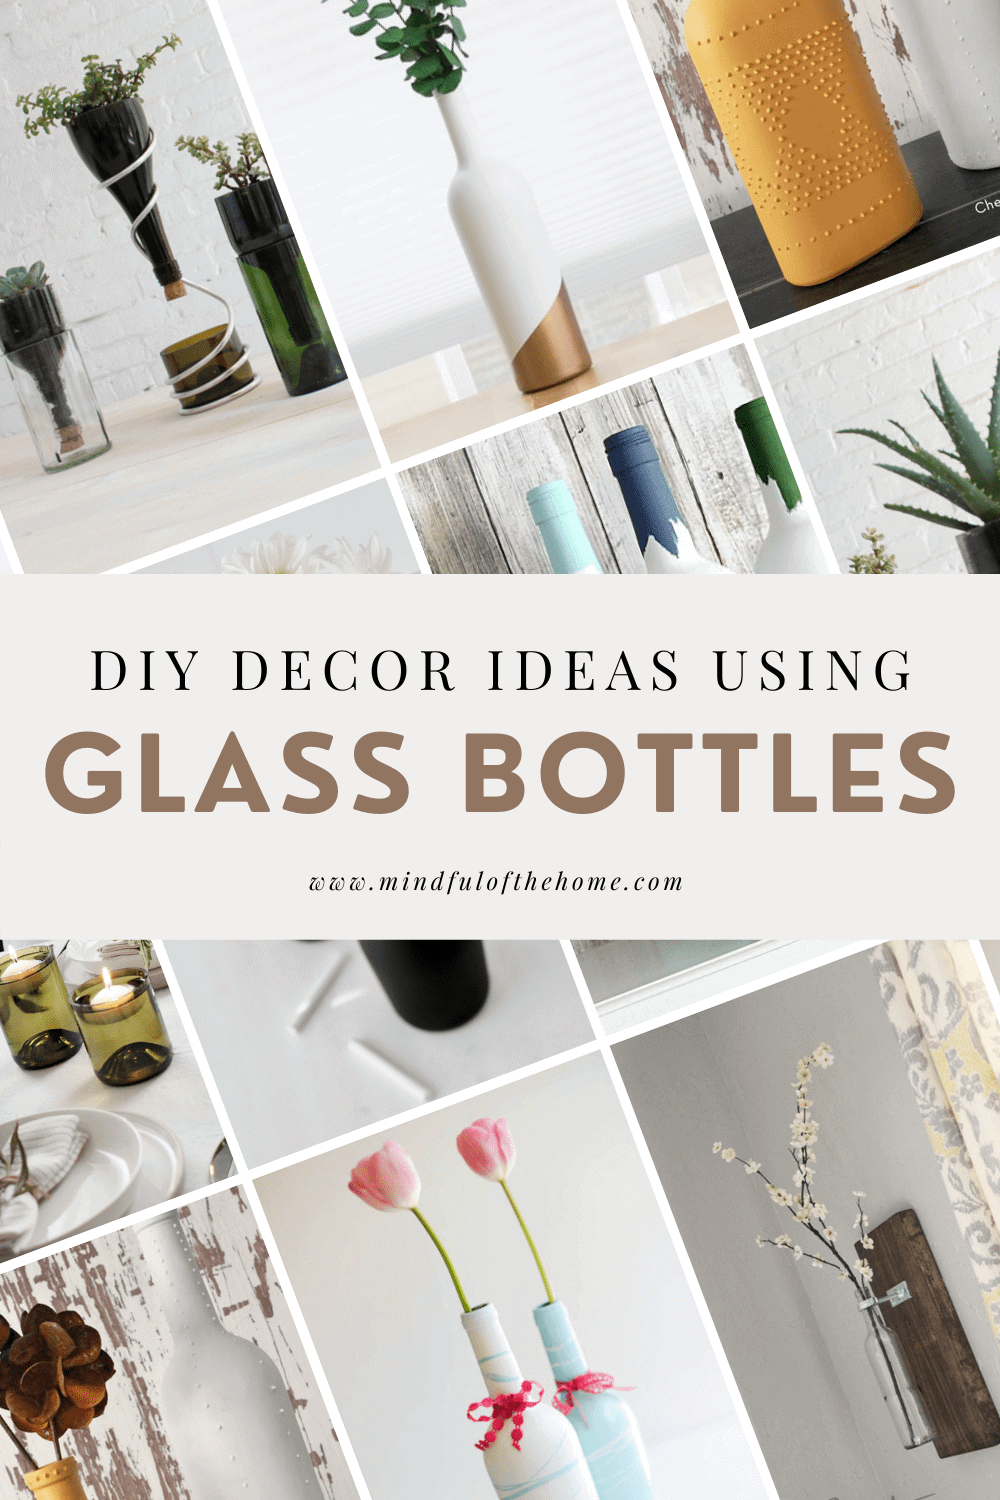 Recycled Bottle Ideas: Clever Reuse Projects - Mod Podge Rocks